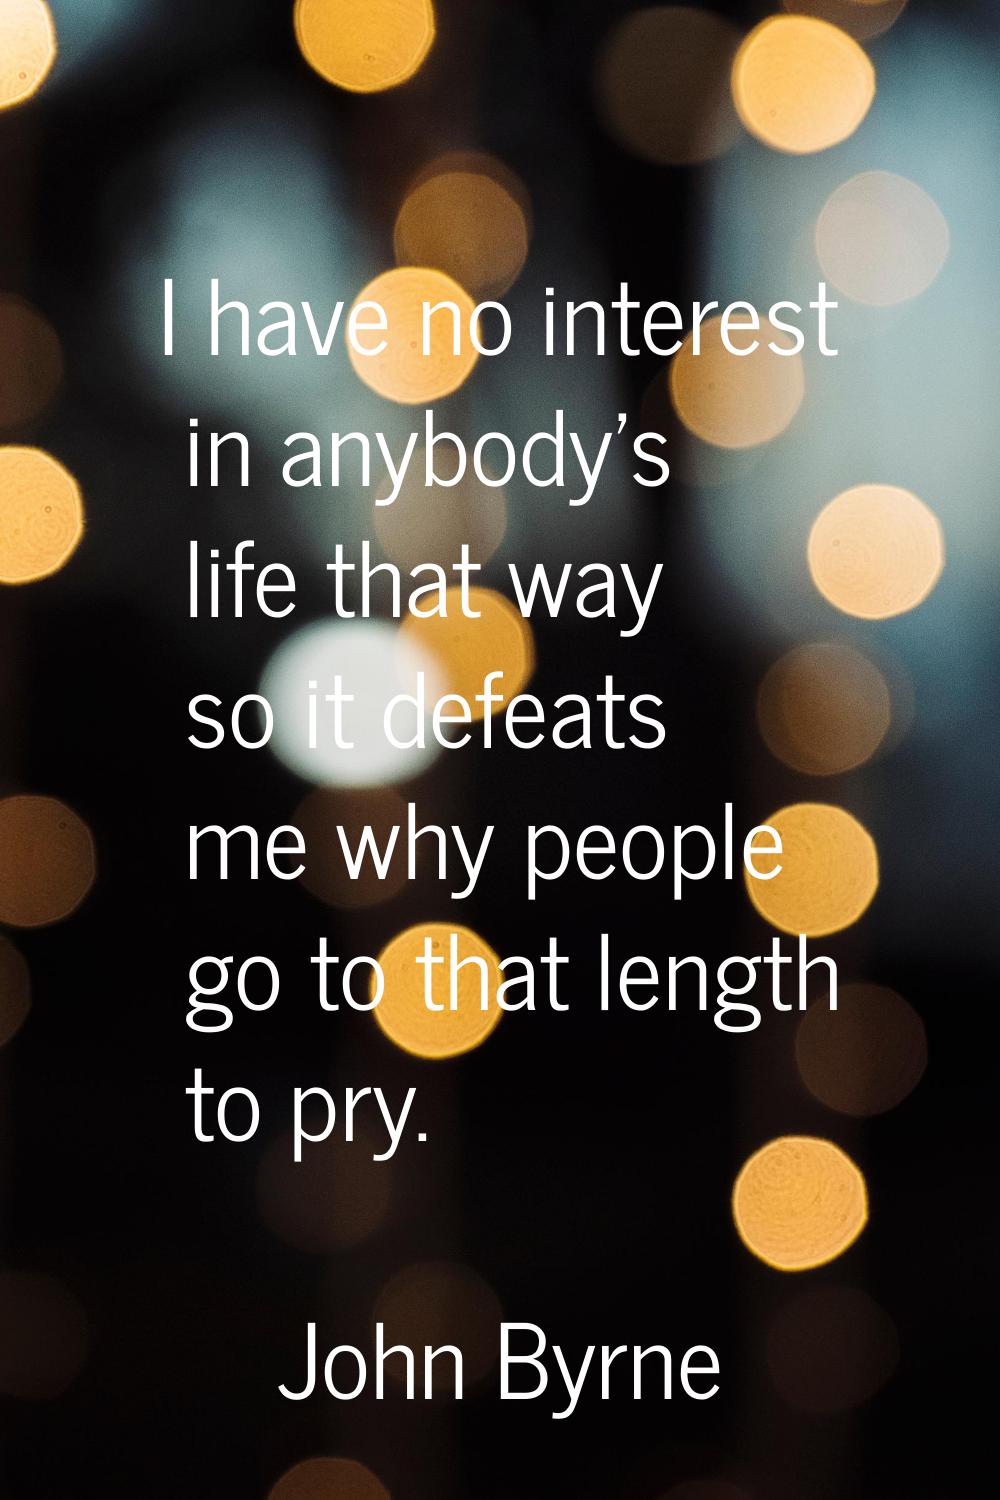 I have no interest in anybody's life that way so it defeats me why people go to that length to pry.